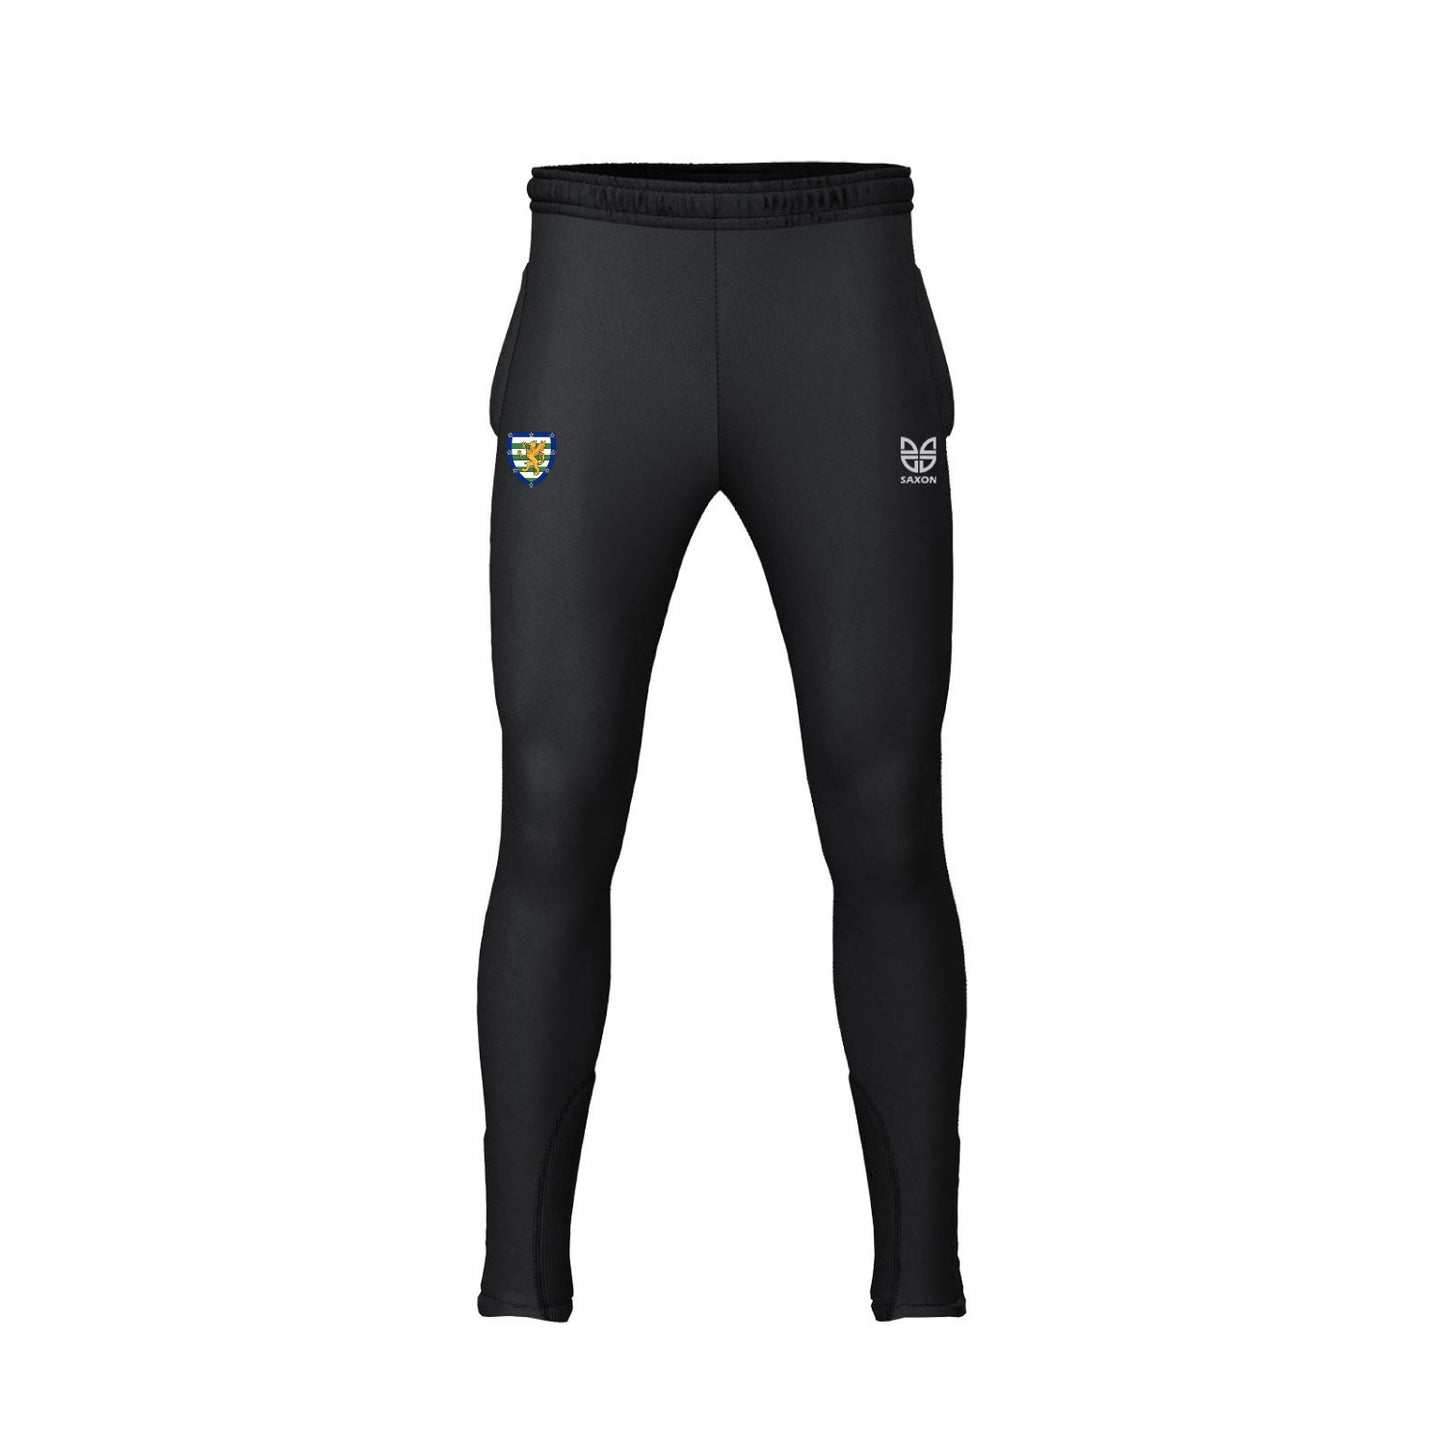 Downing College Cricket Club Skinny Tracksuit Trousers